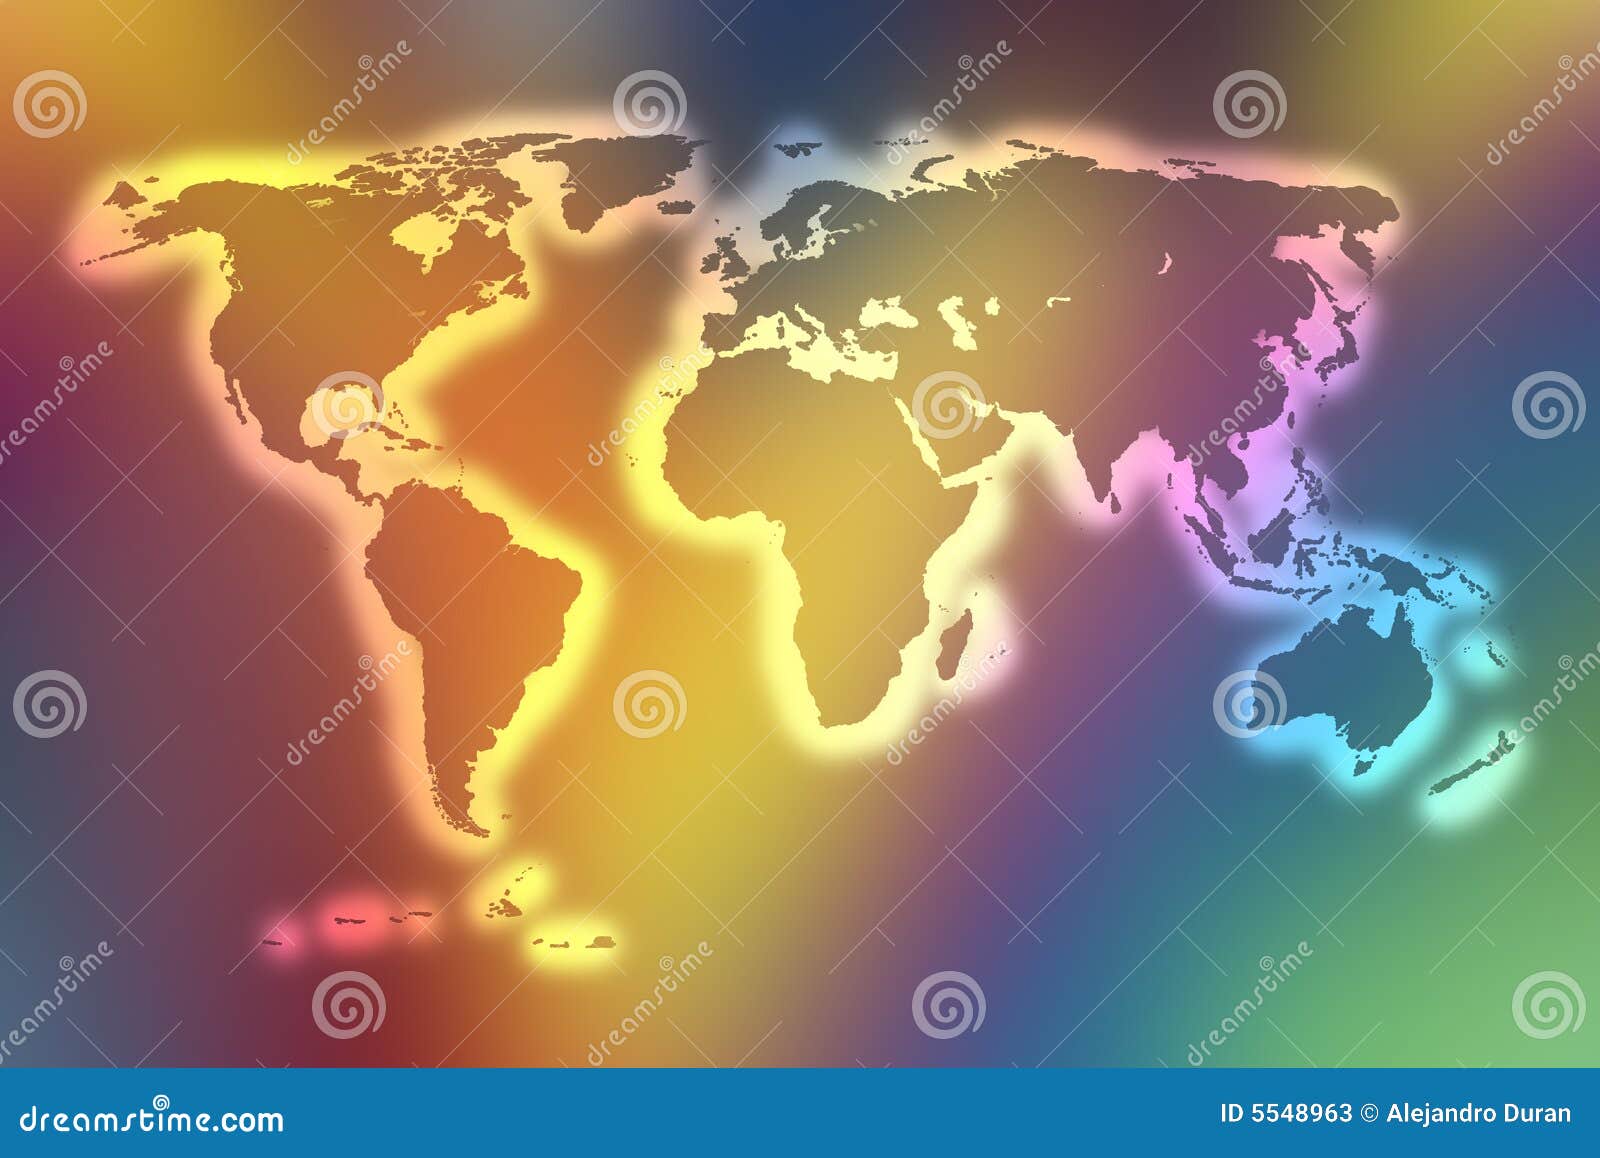 color-world-map-with-countries-borders-stock-illustration